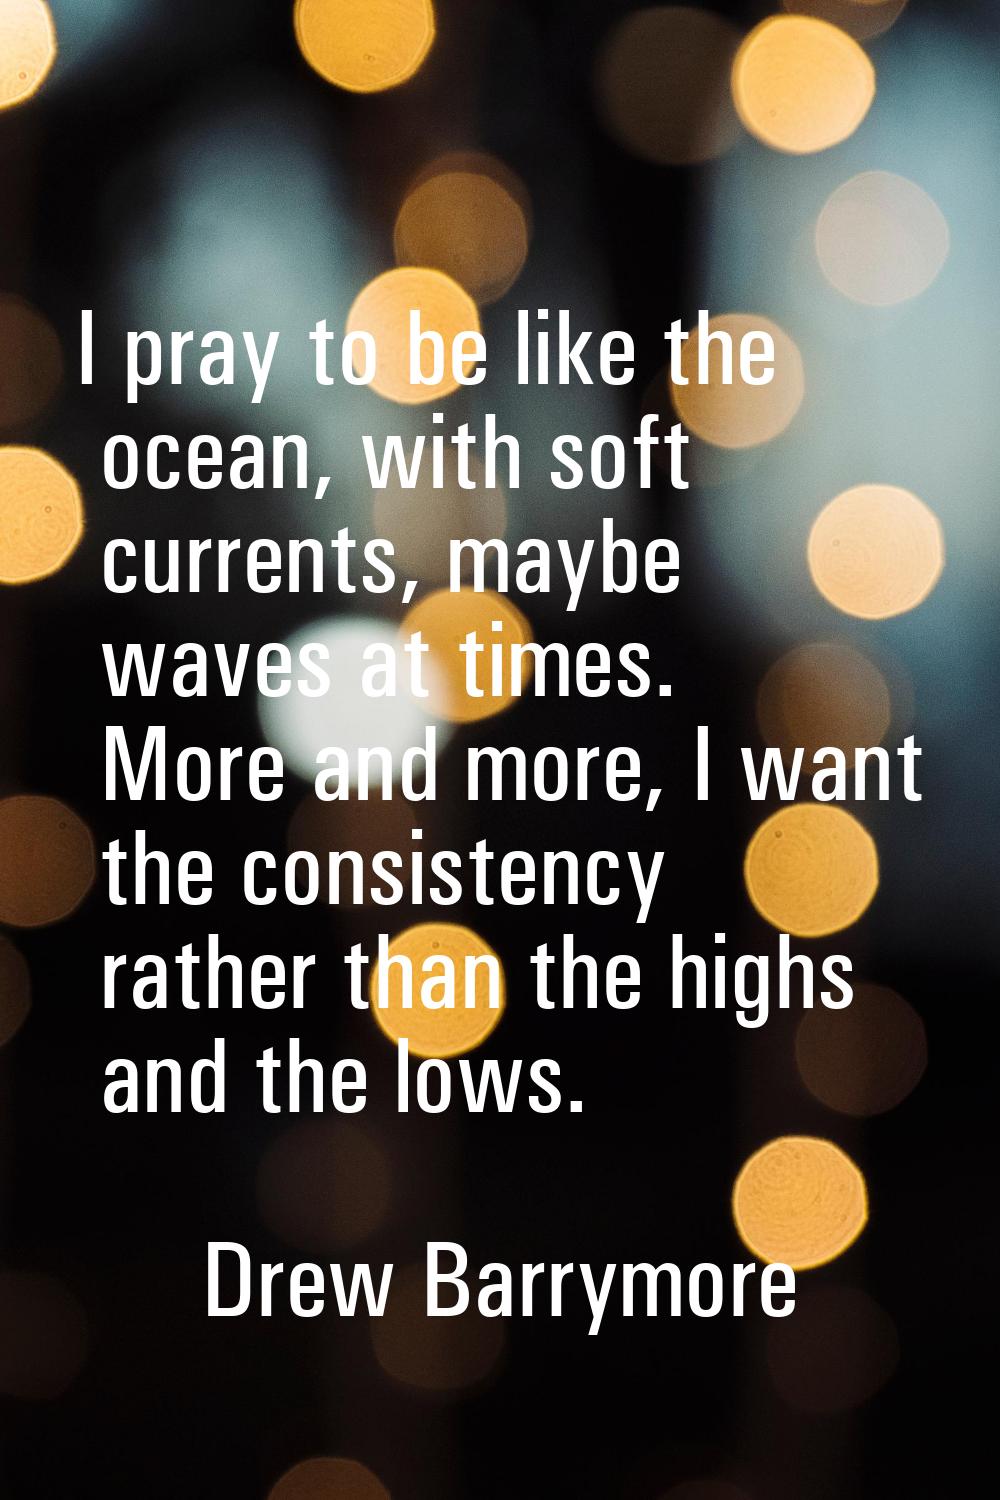 I pray to be like the ocean, with soft currents, maybe waves at times. More and more, I want the co